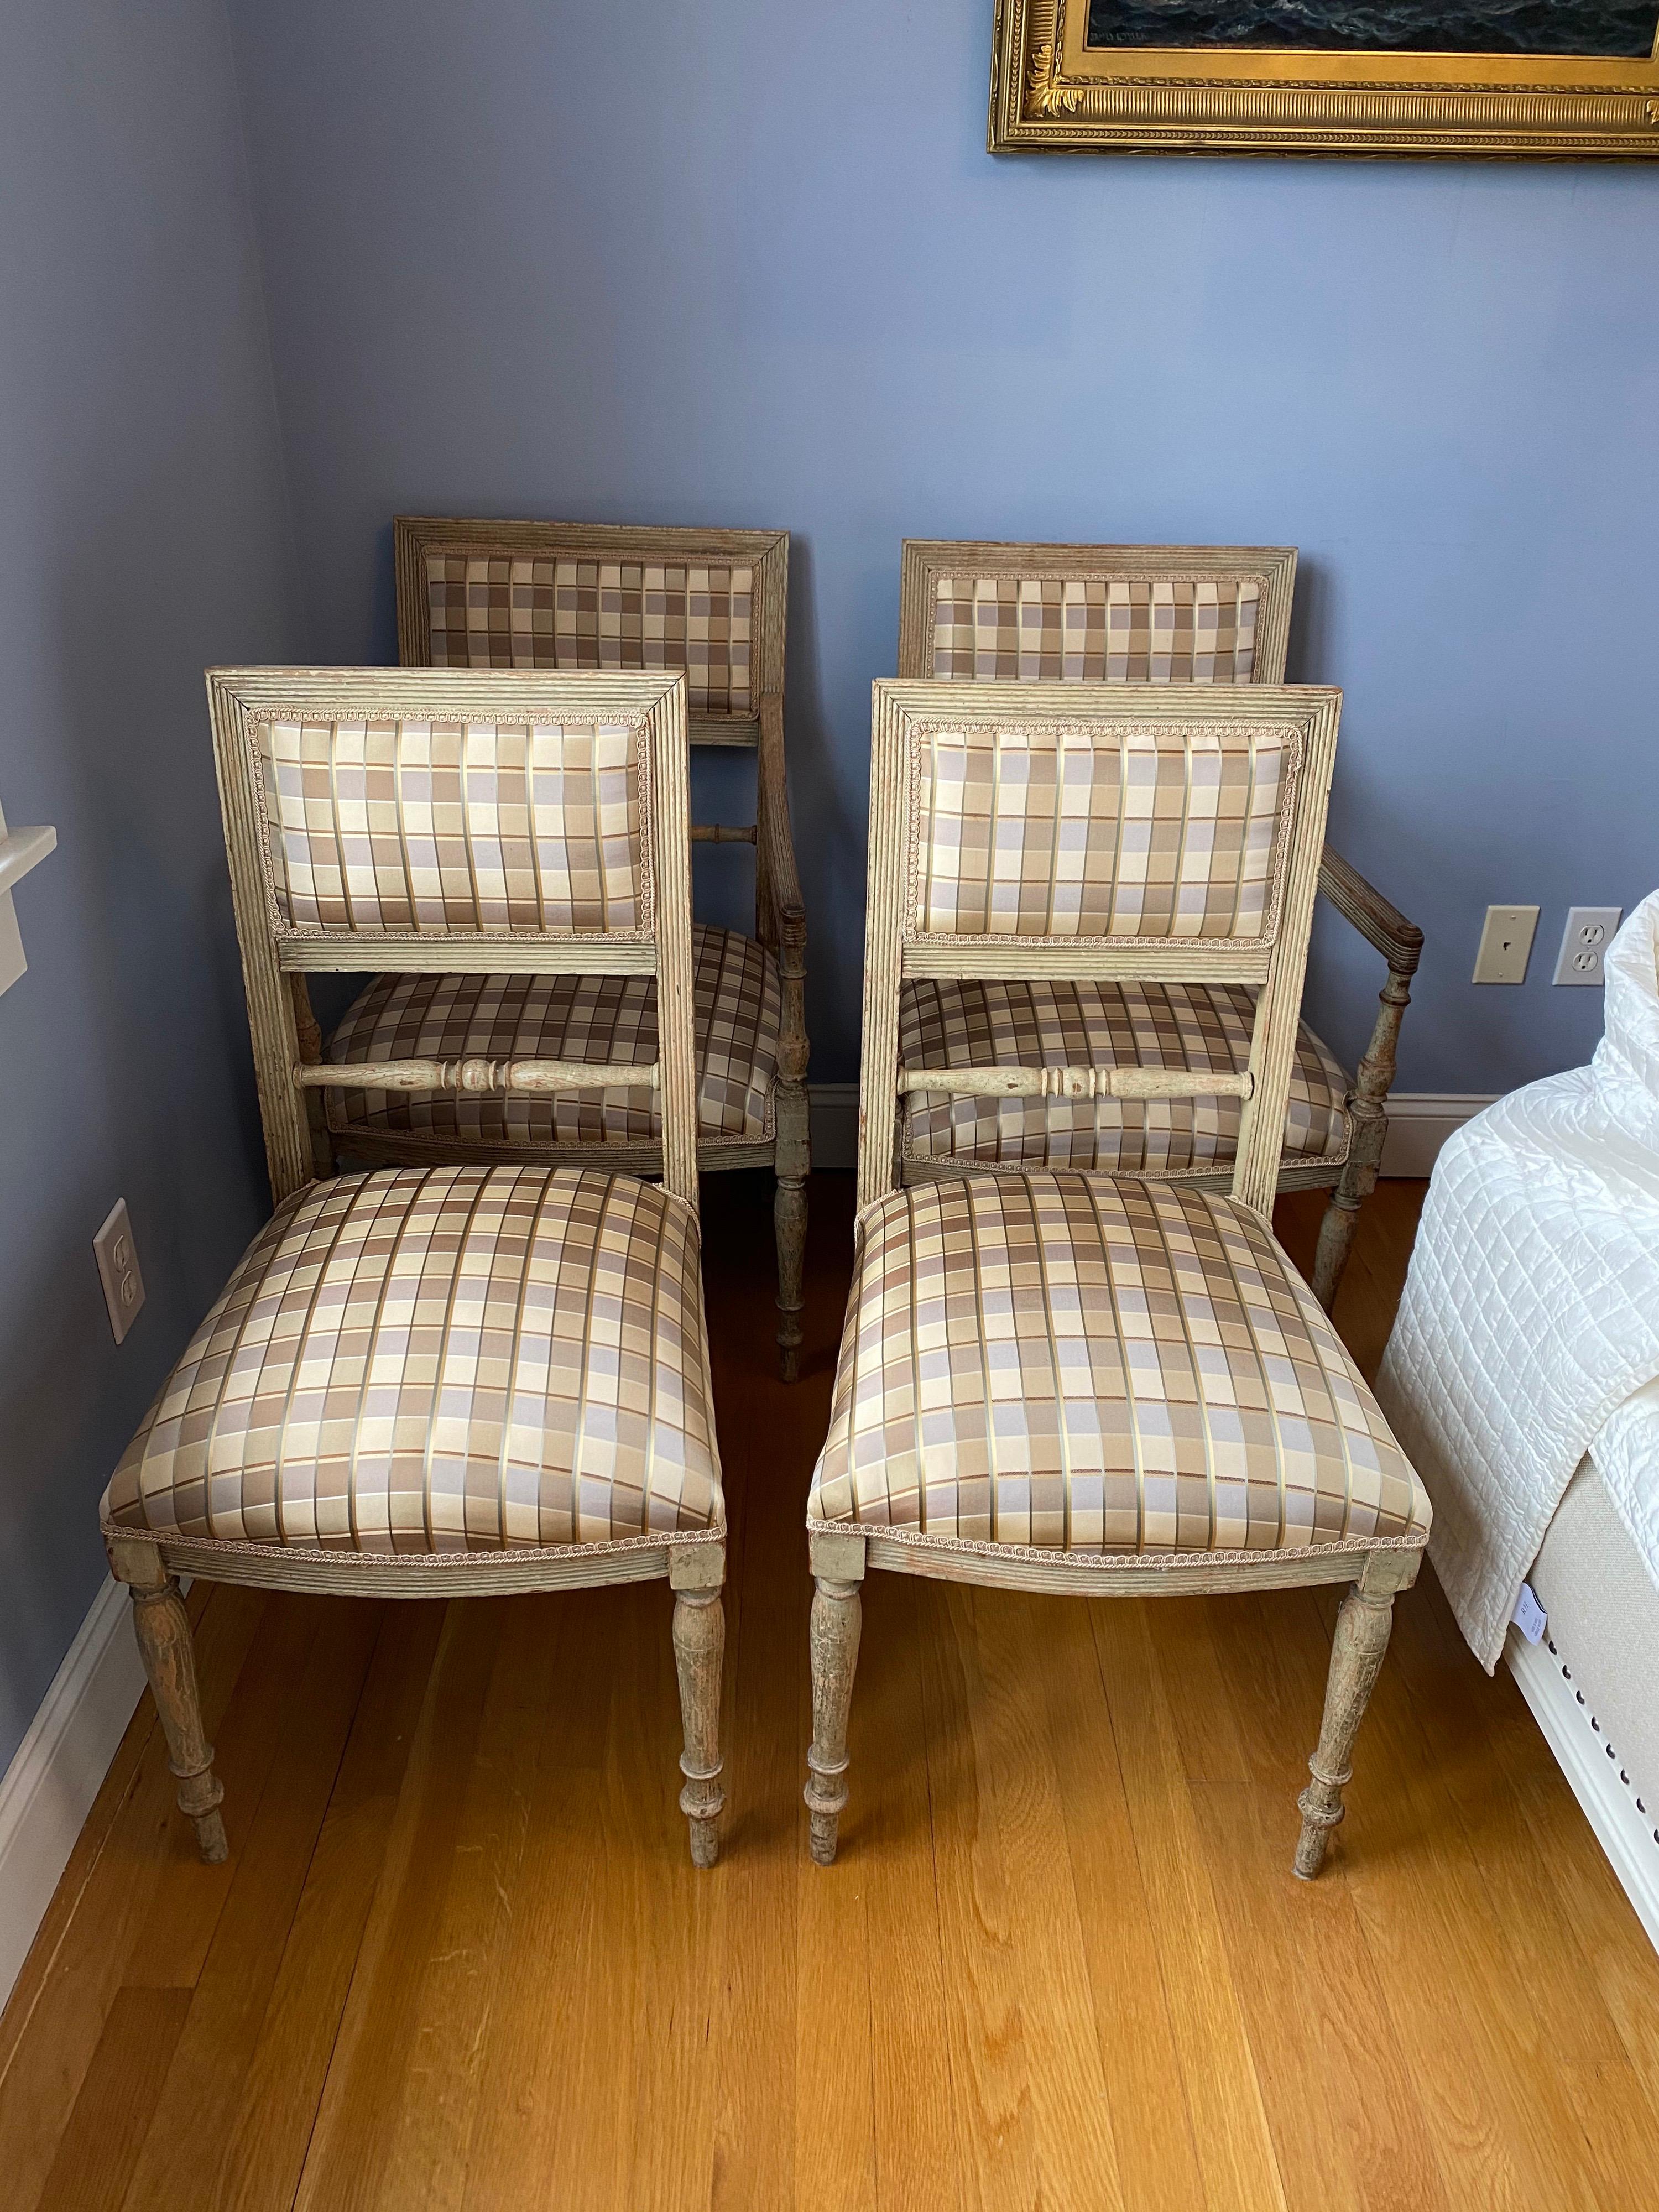 Set of four 19th century Swedish painted armchairs and side chairs in silk plaid.
Lovely design. Upholstery in silk plaid with small tape trim applied all around.
Structurally sound. Age to finish consistent with use.

Measures: Armchairs: 21.5